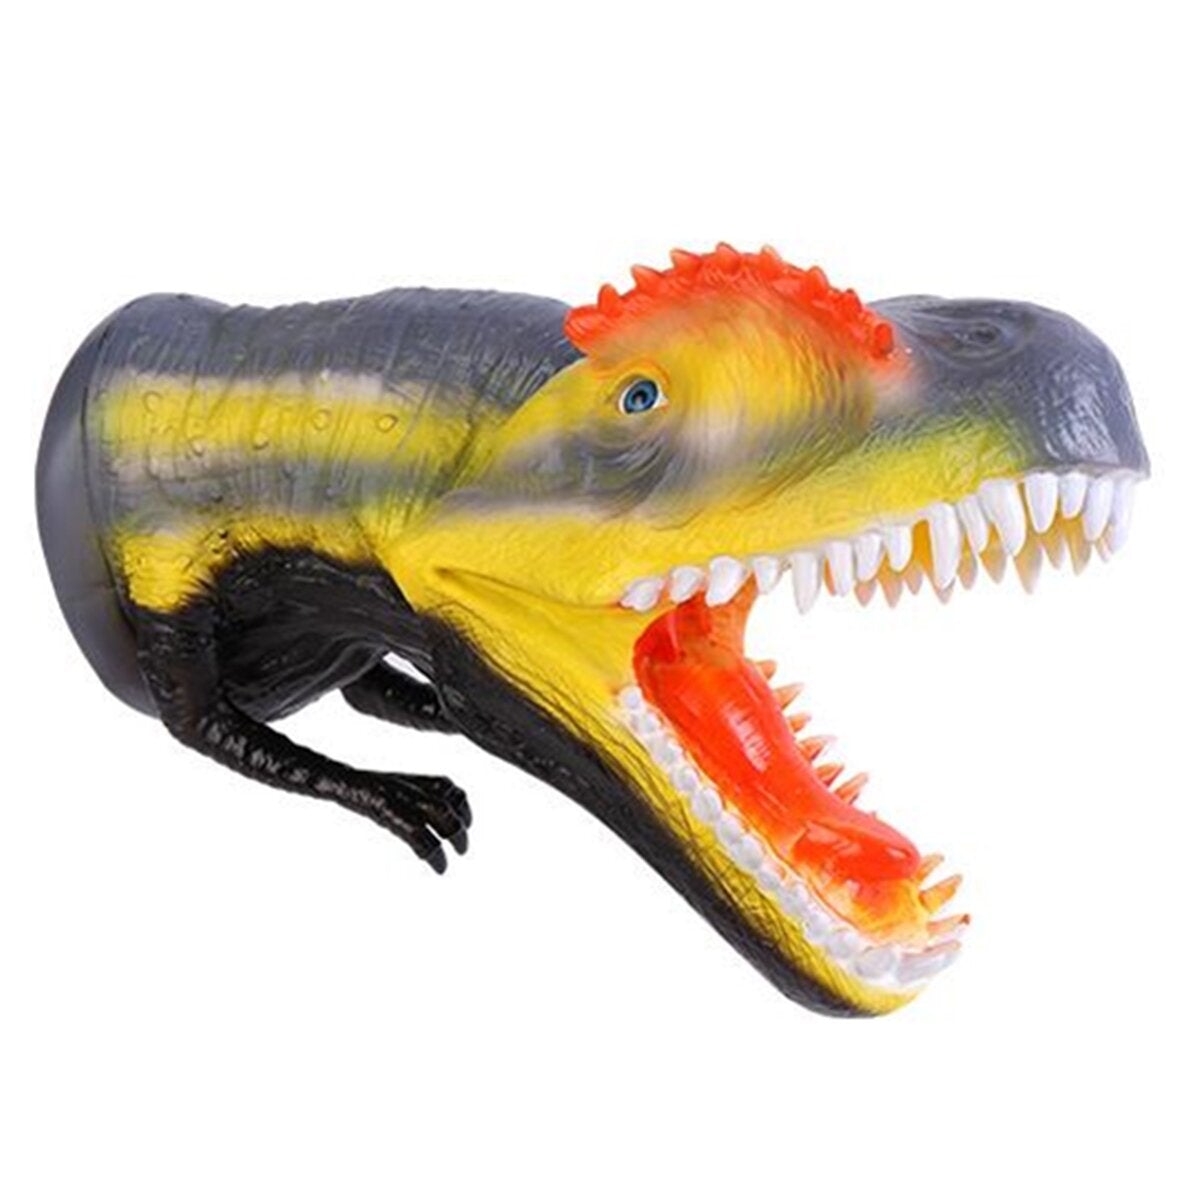 Dinosaur Hand Puppet Realistic Museum Details Jurassic Play Diecast Model Decor Toys Collection